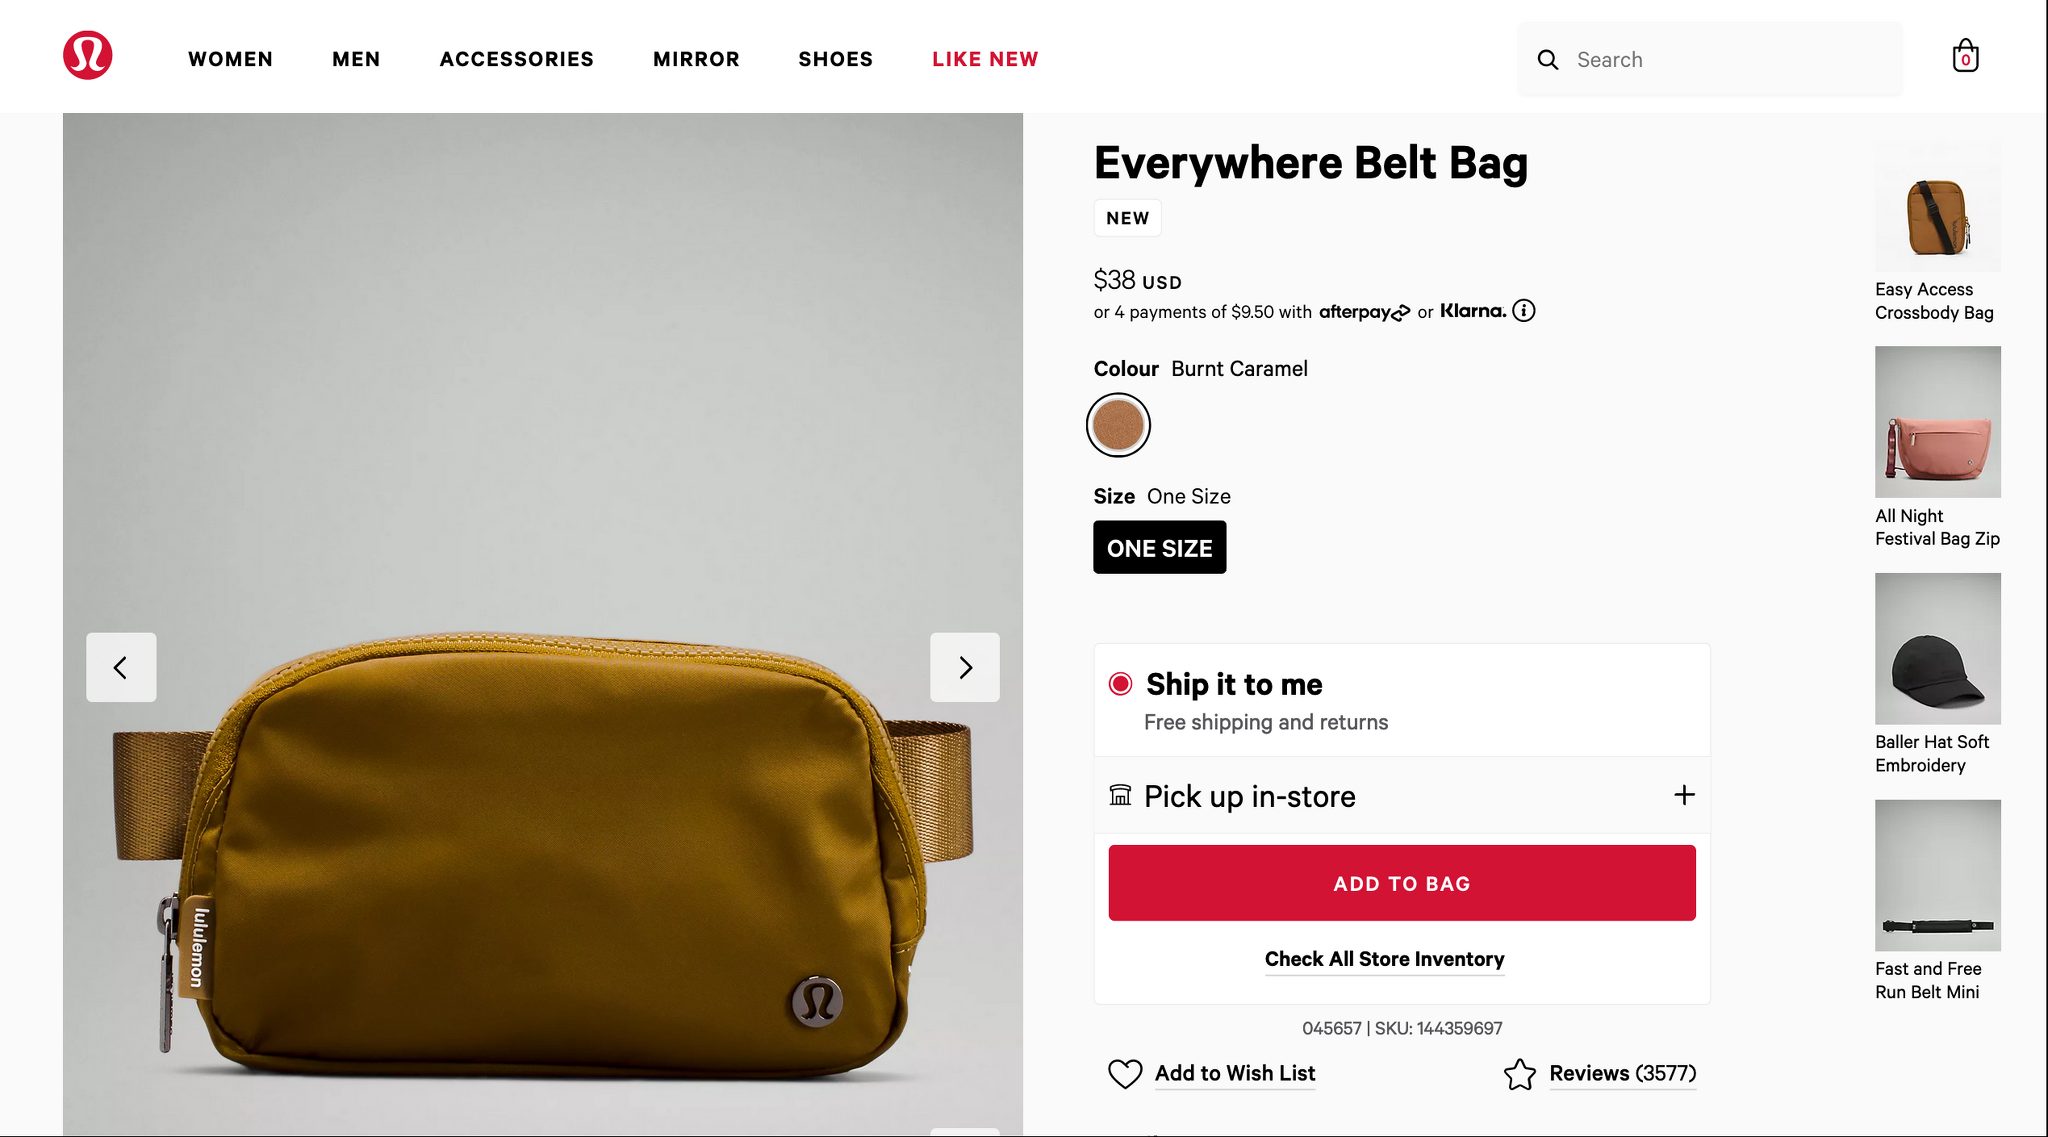 Lululemons Everywhere Belt Bag now comes in a clear version